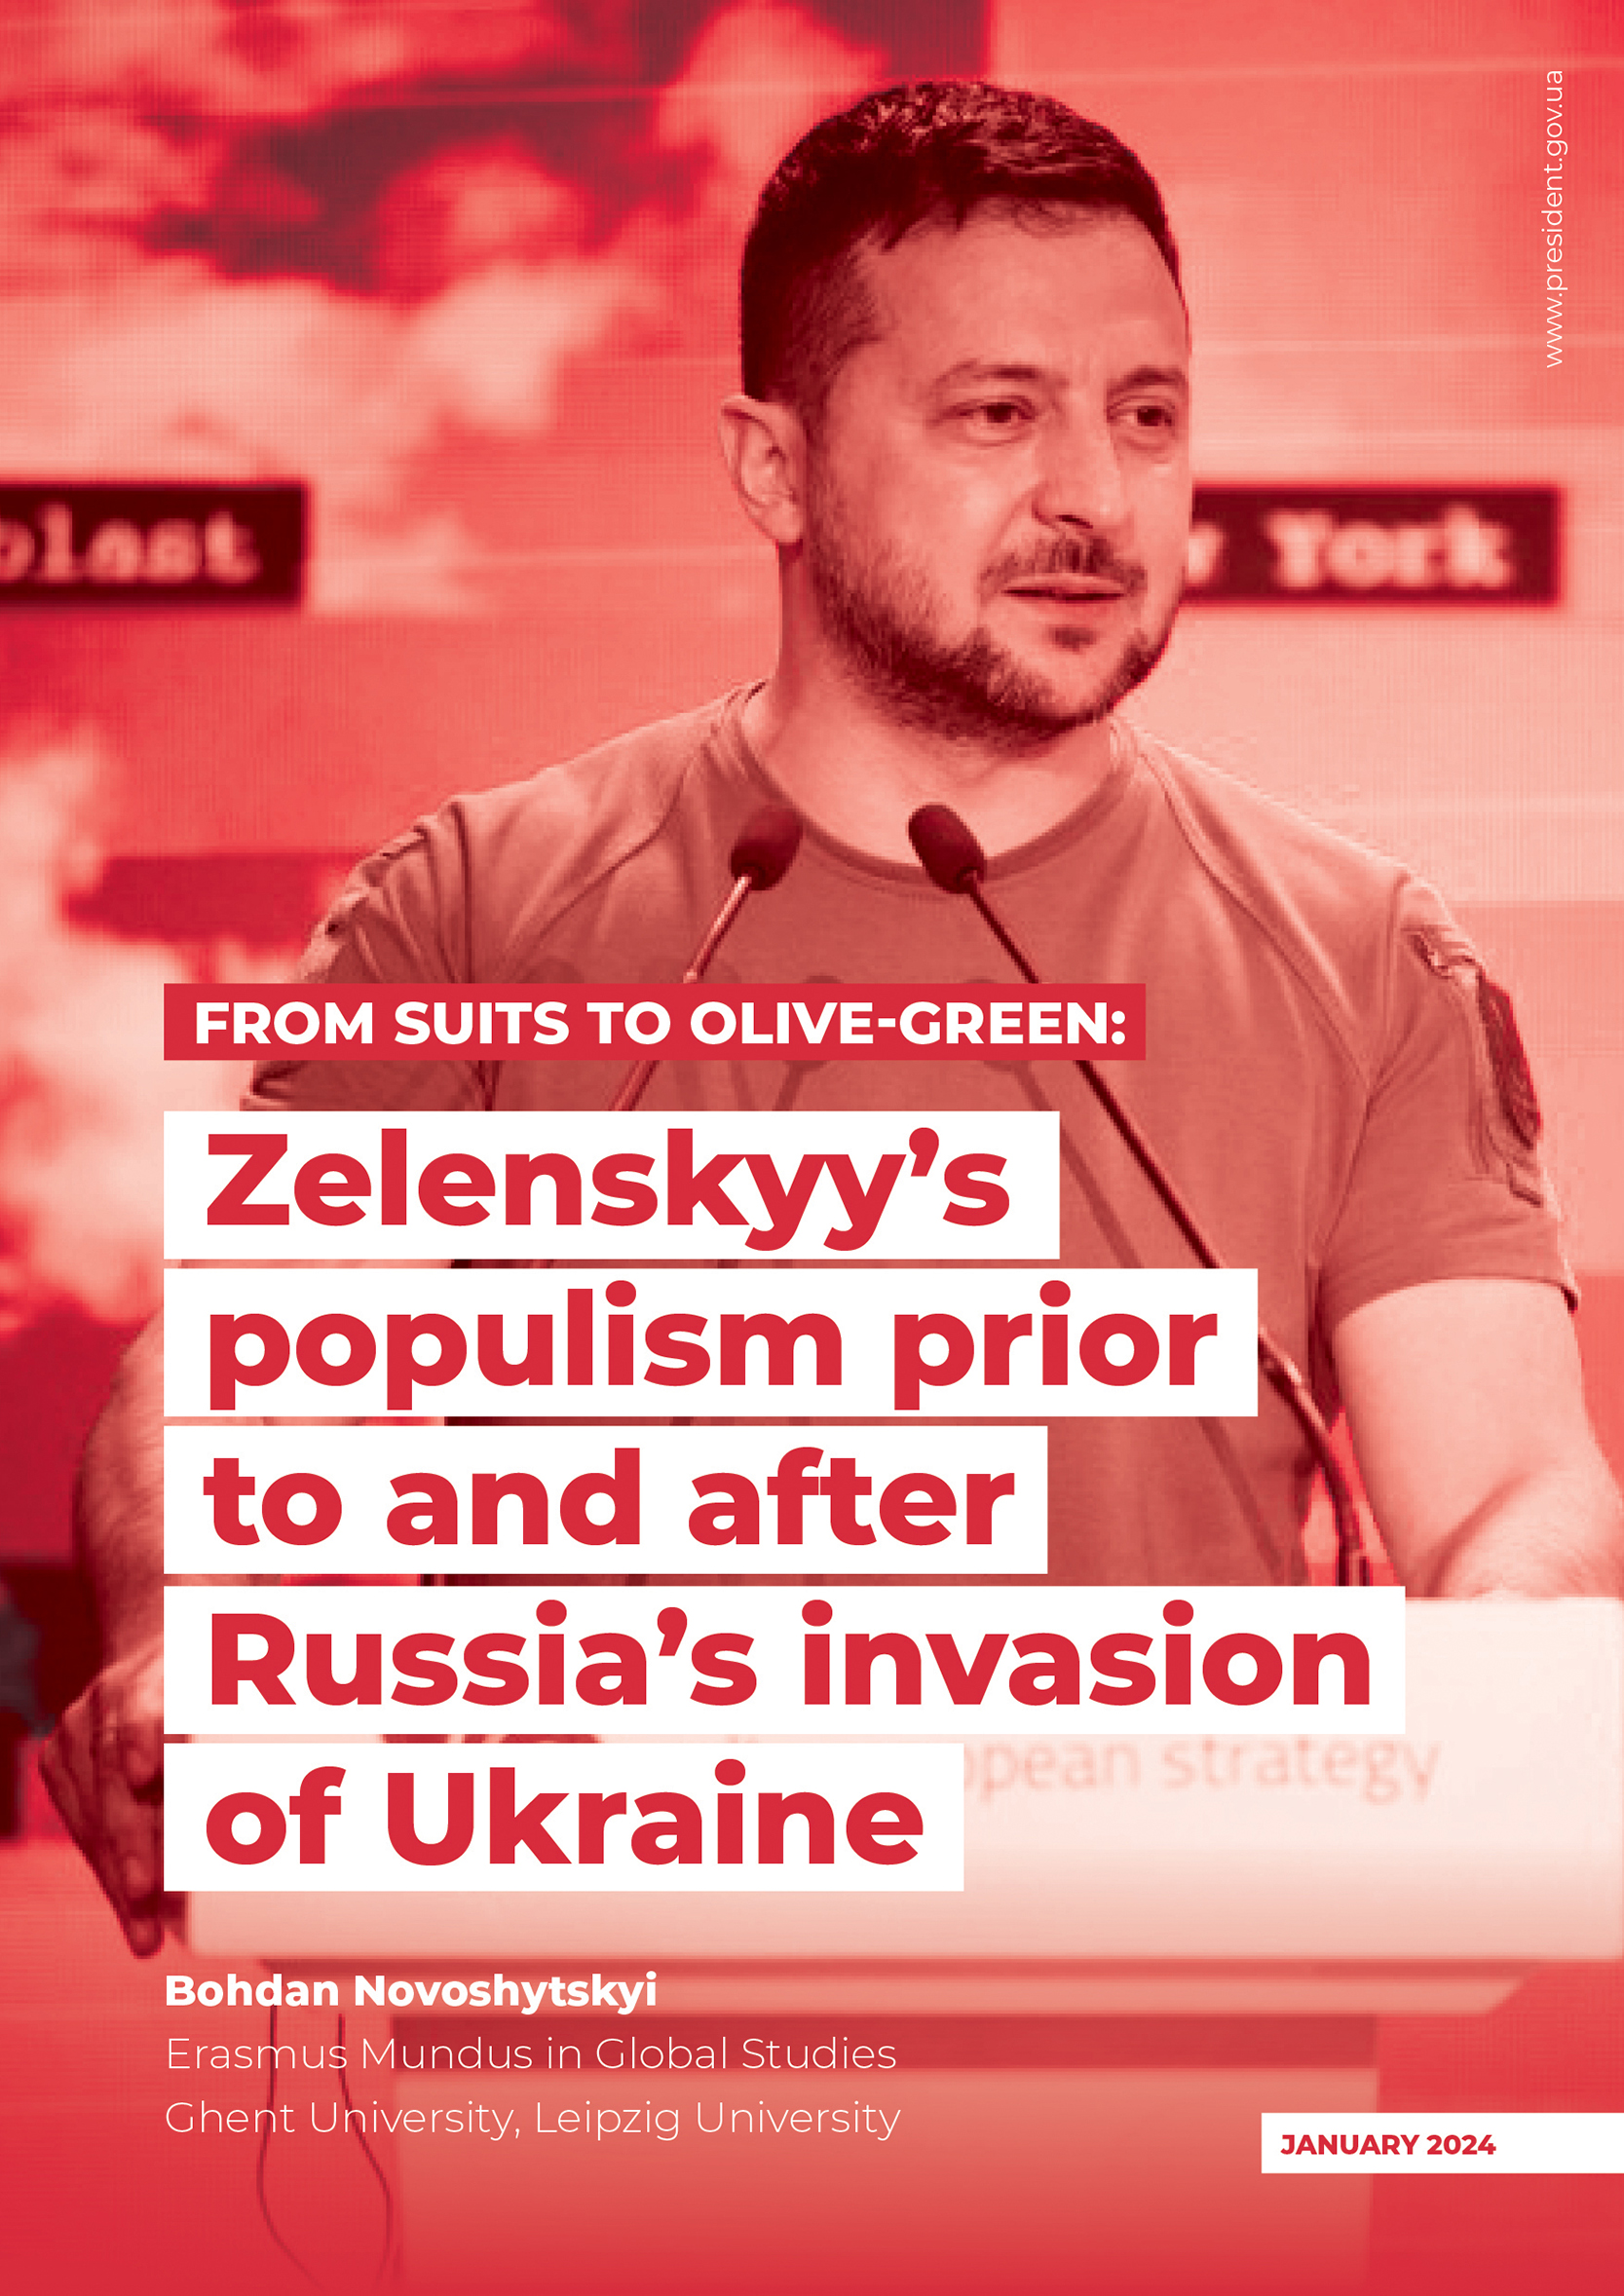 06_Zelenskyy’s populism prior to and after Russia’s invasion of Ukraine_4